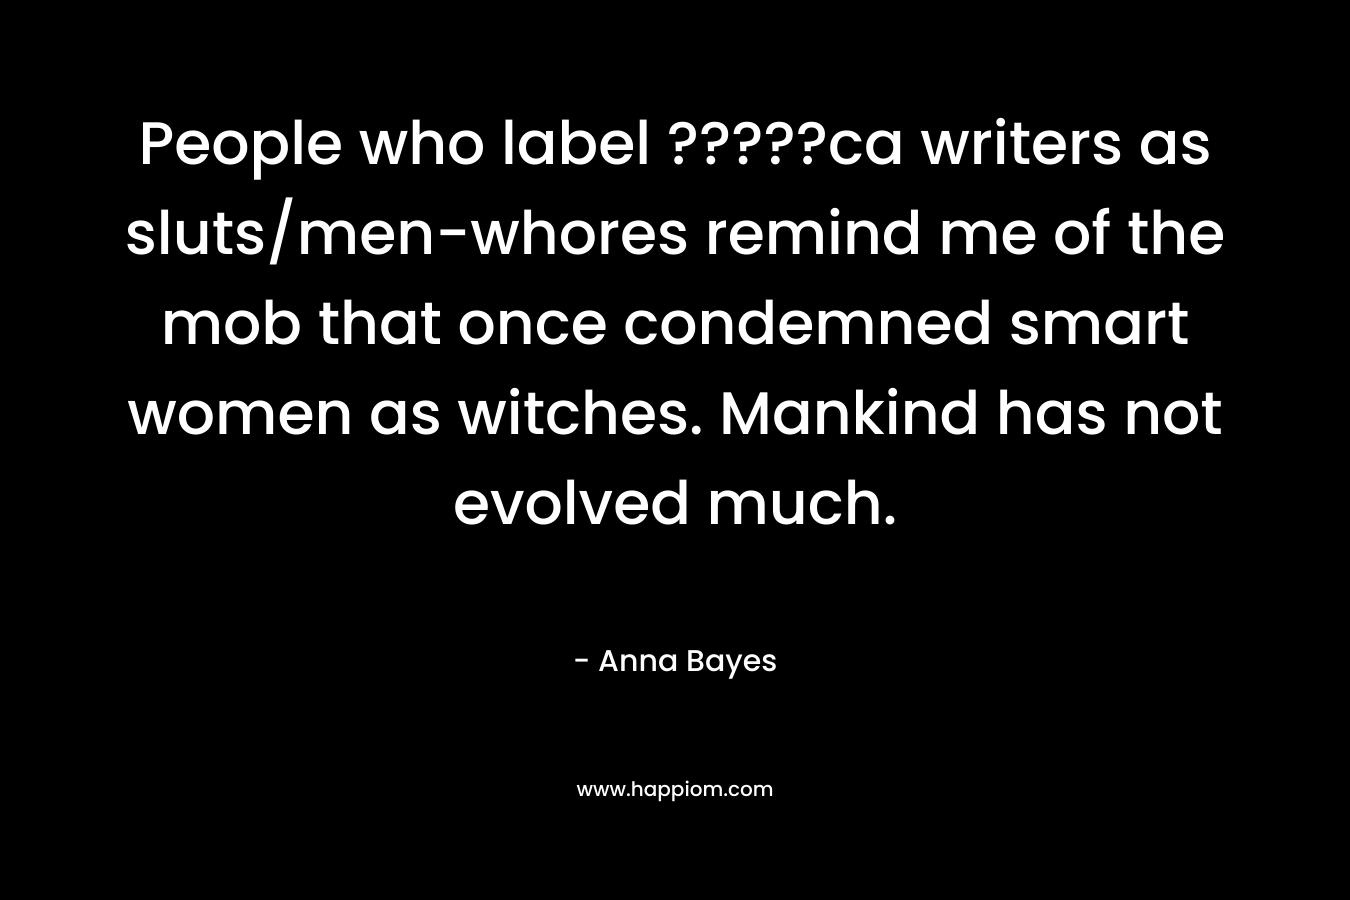 People who label ?????ca writers as sluts/men-whores remind me of the mob that once condemned smart women as witches. Mankind has not evolved much. – Anna Bayes